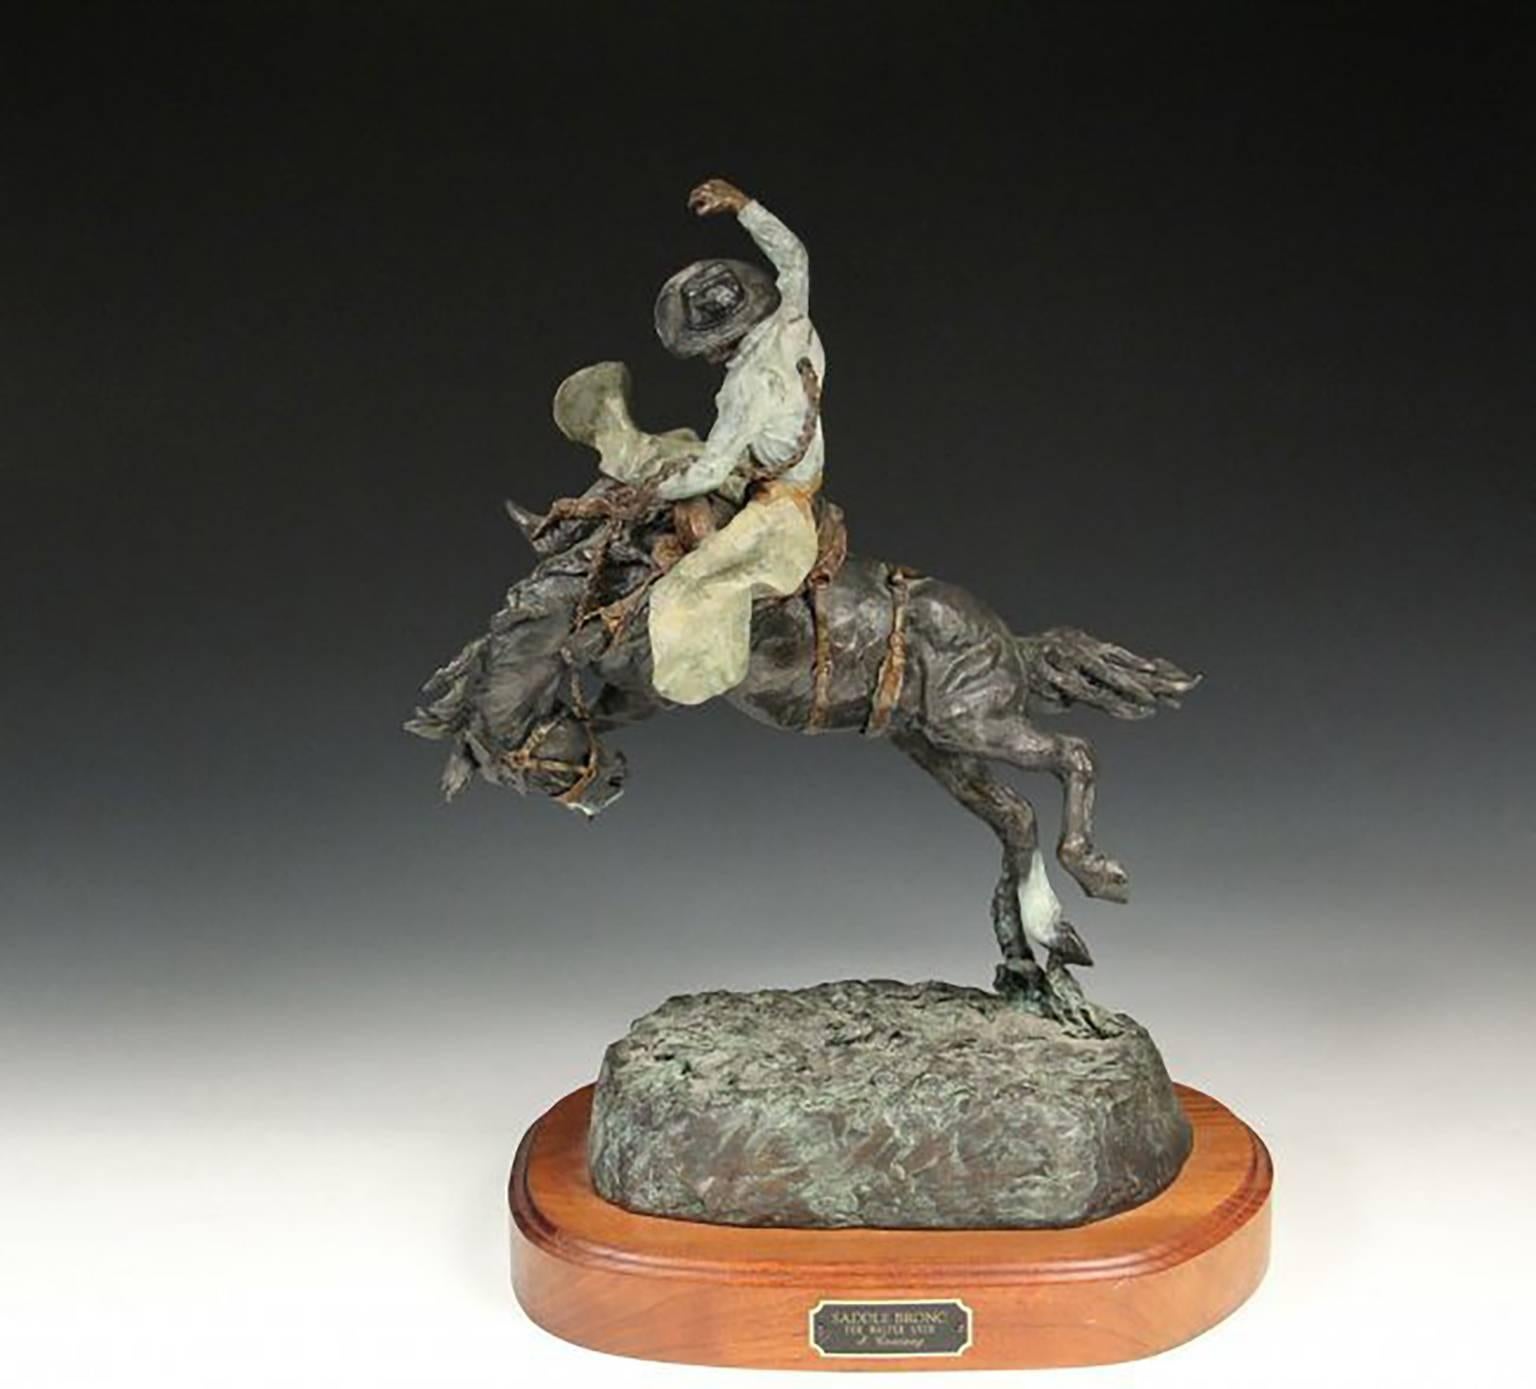 Wonderful Very Limited Edition Bronze Sculpture by Famed Western Sculpture Artist JAY CONTWAY (MT, 1935 – )  Titled “Saddle Bronc”  Beautiful painted cast bronze  Artist Signed on base and numbered 10/24  Mounted on a wooden base with a built-in